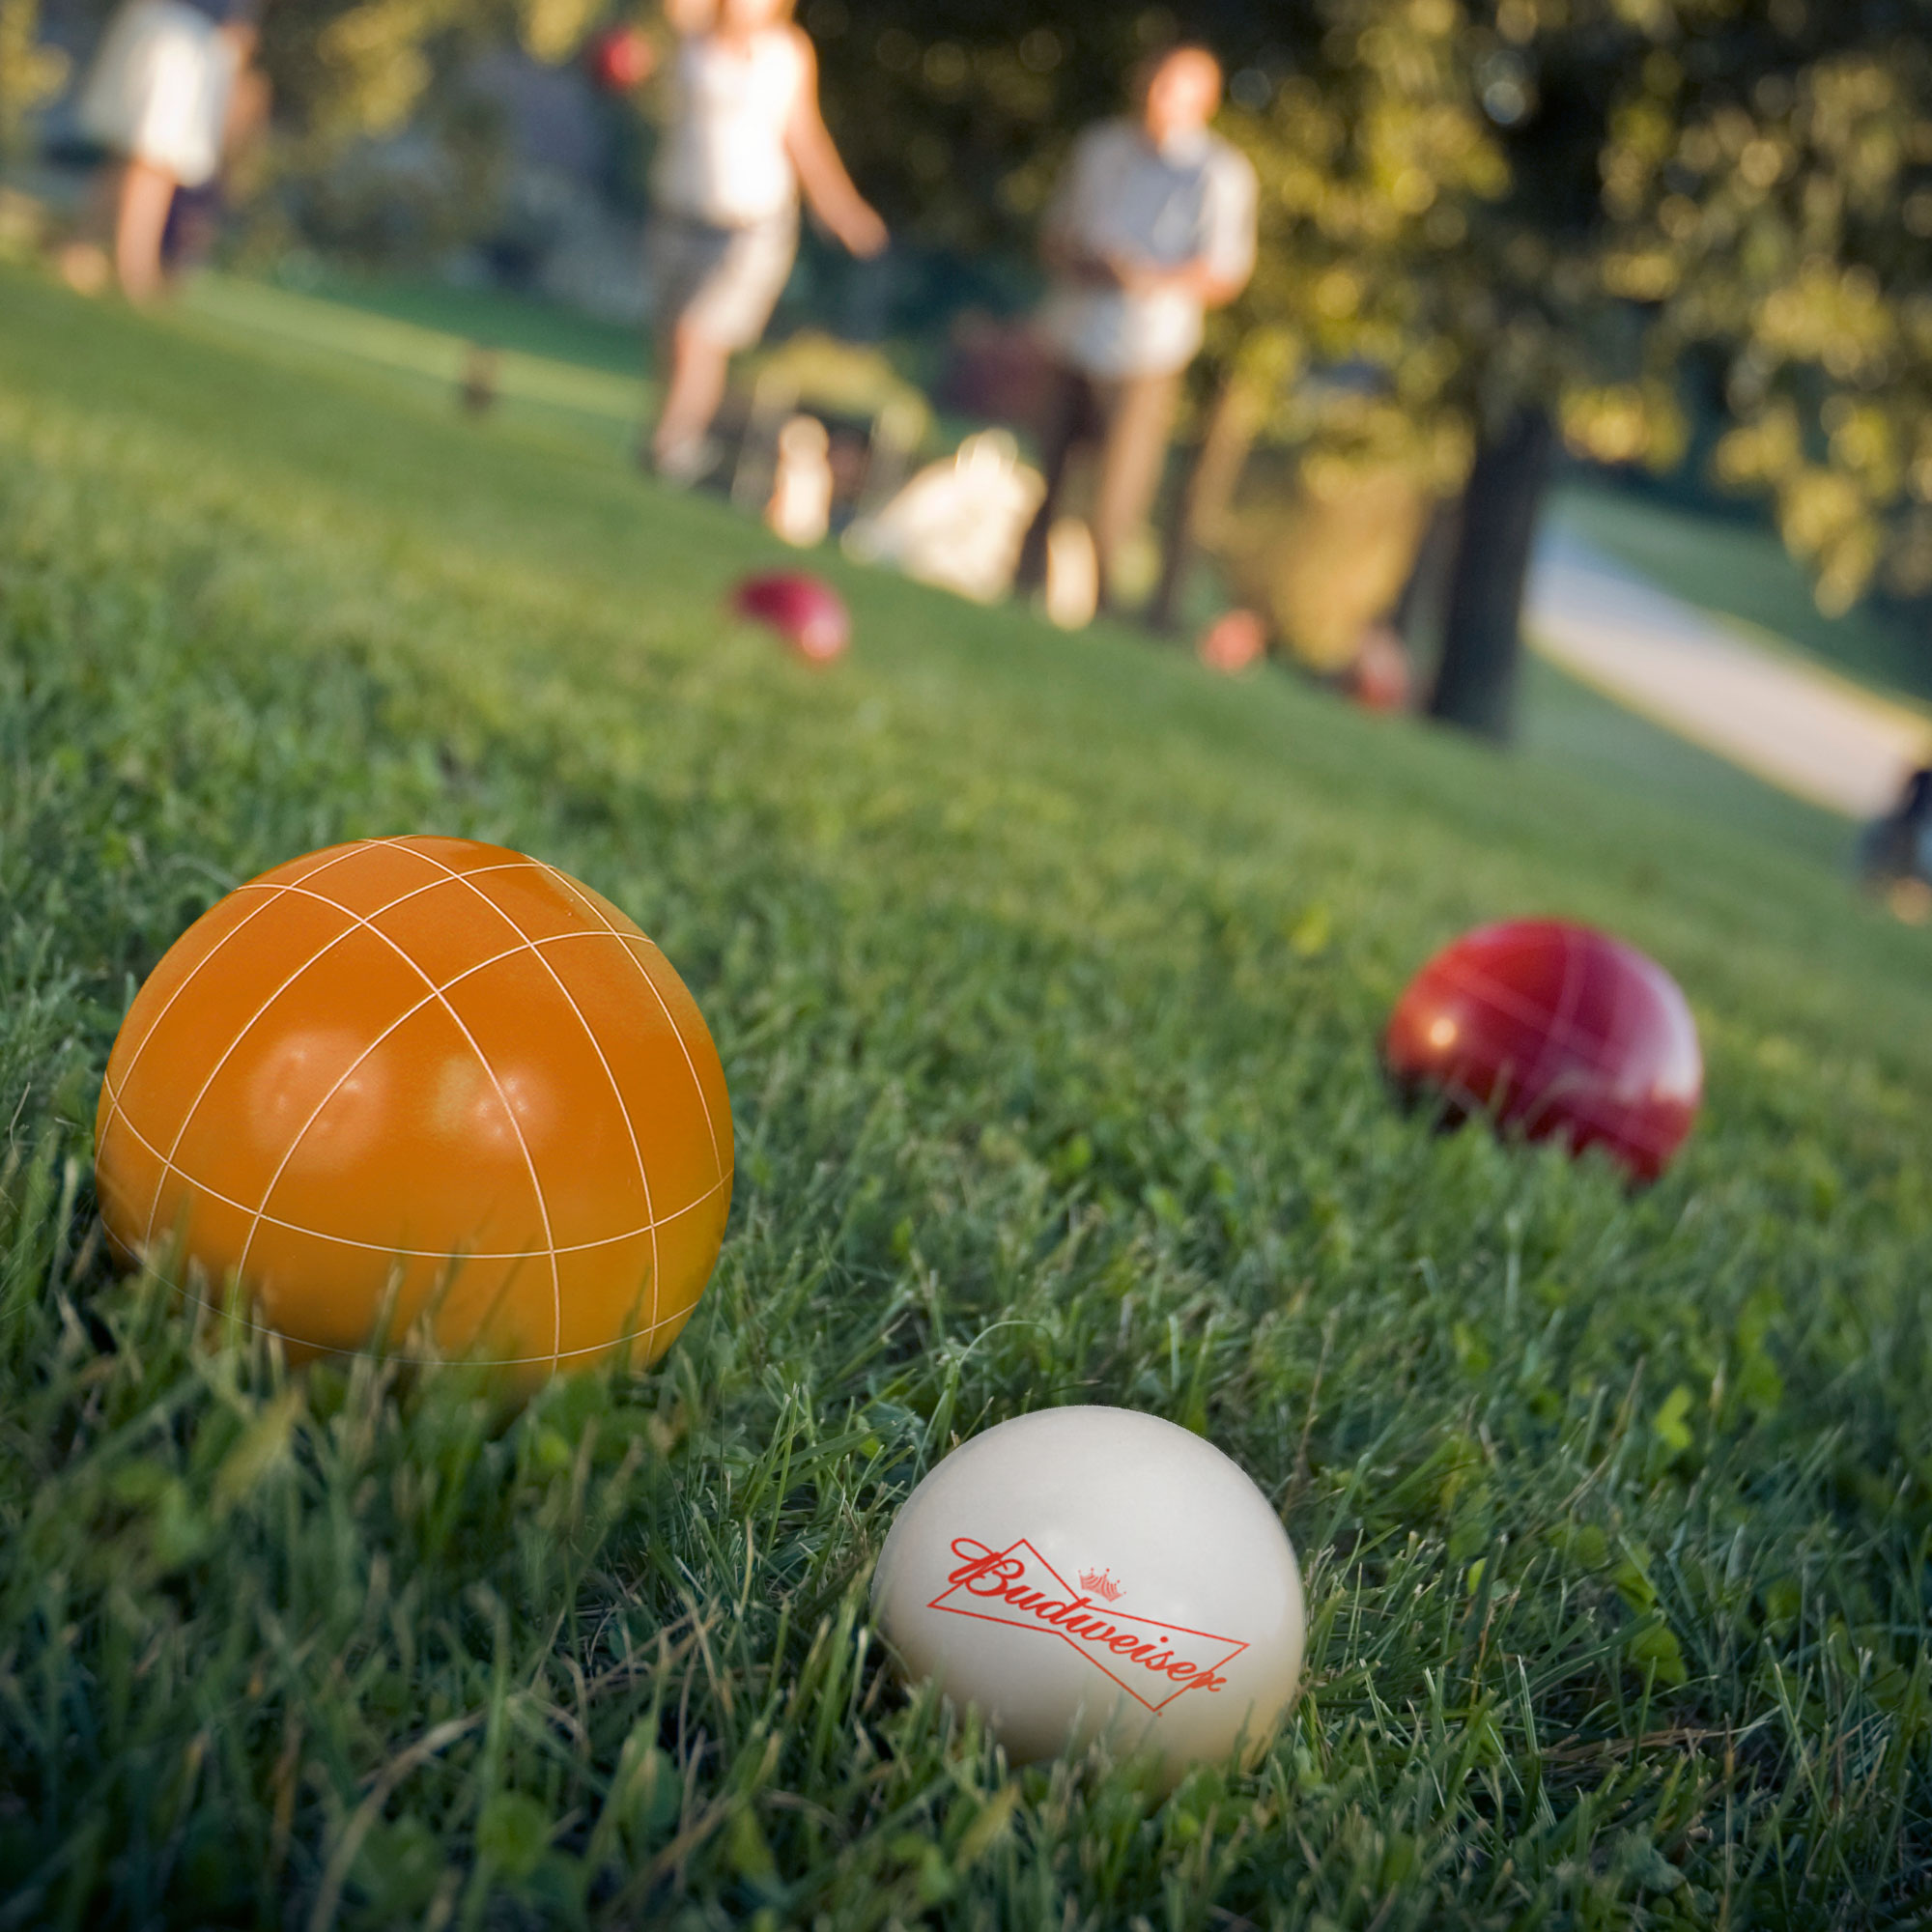 Bocce Ball Set- Regulation Outdoor Family Bocce Game by Hey! Play! (Budweiser) - image 1 of 2